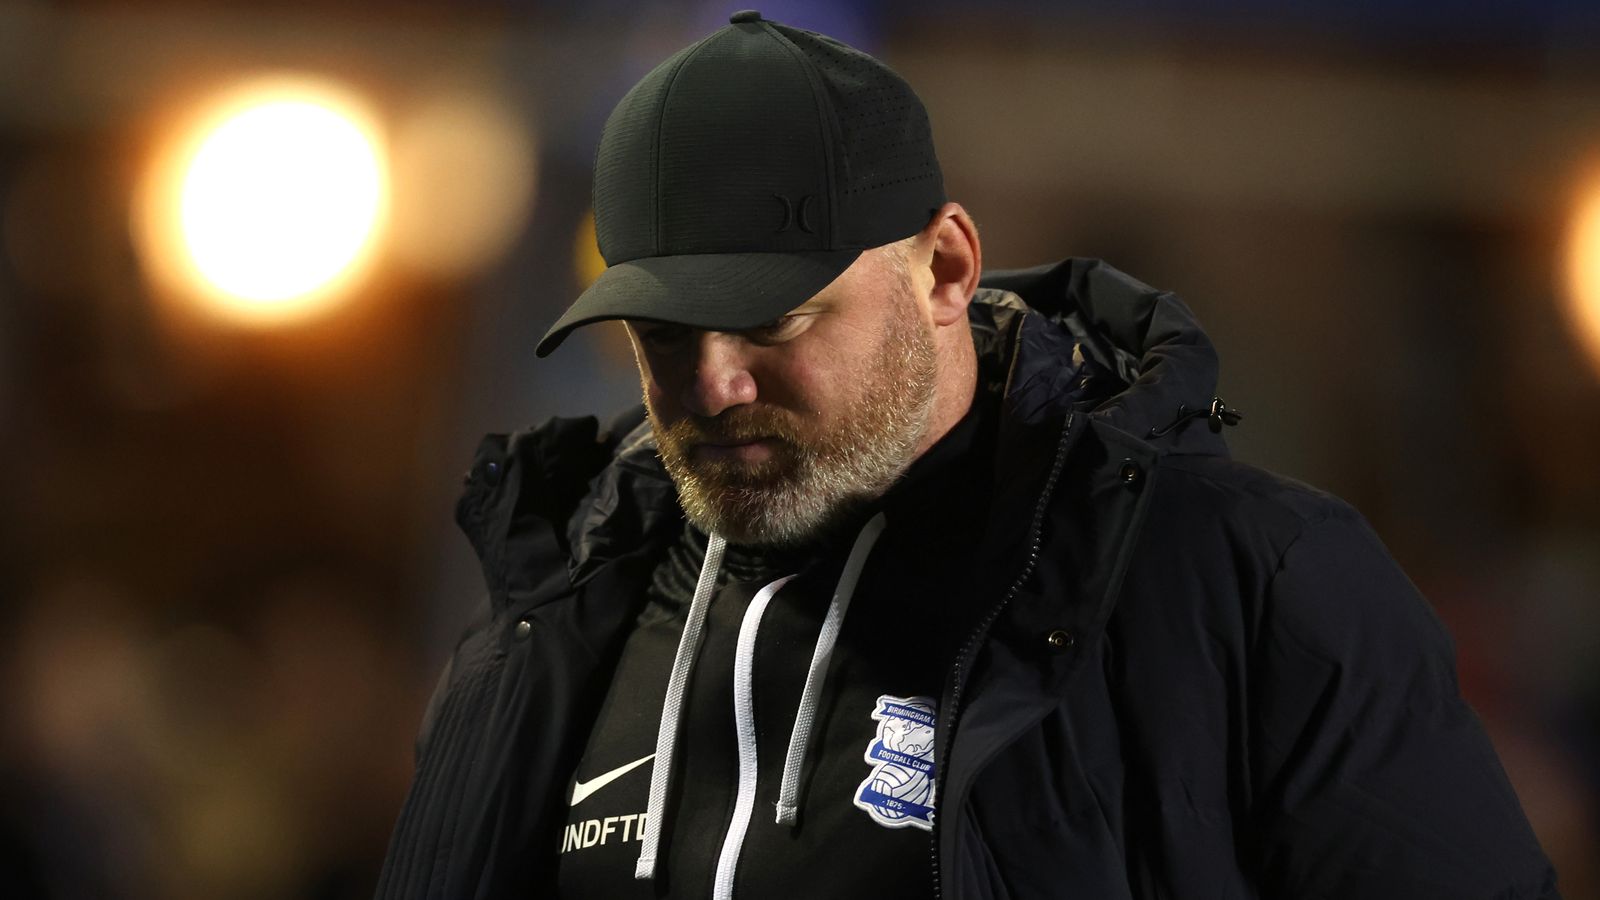 Birmingham City sack Wayne Rooney after just 15 games in charge